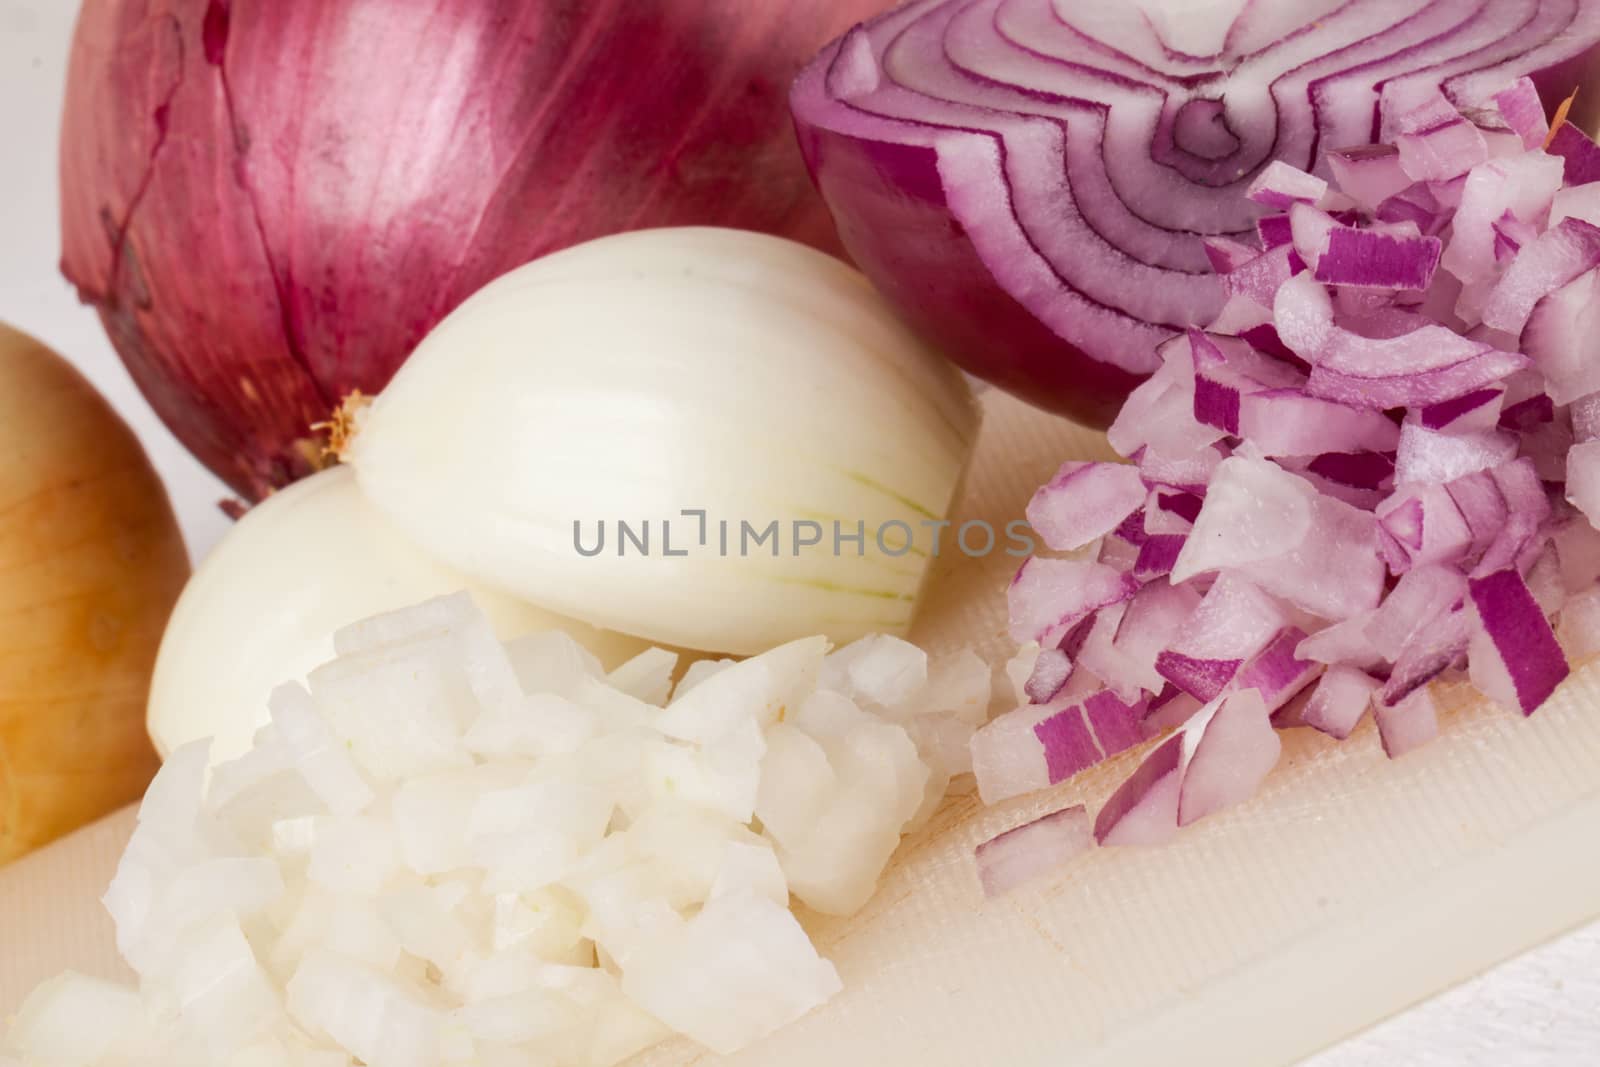 Whole, peeled and diced brown or white onion ready for use as a pungent aromatic flavoring in cooking on a white background